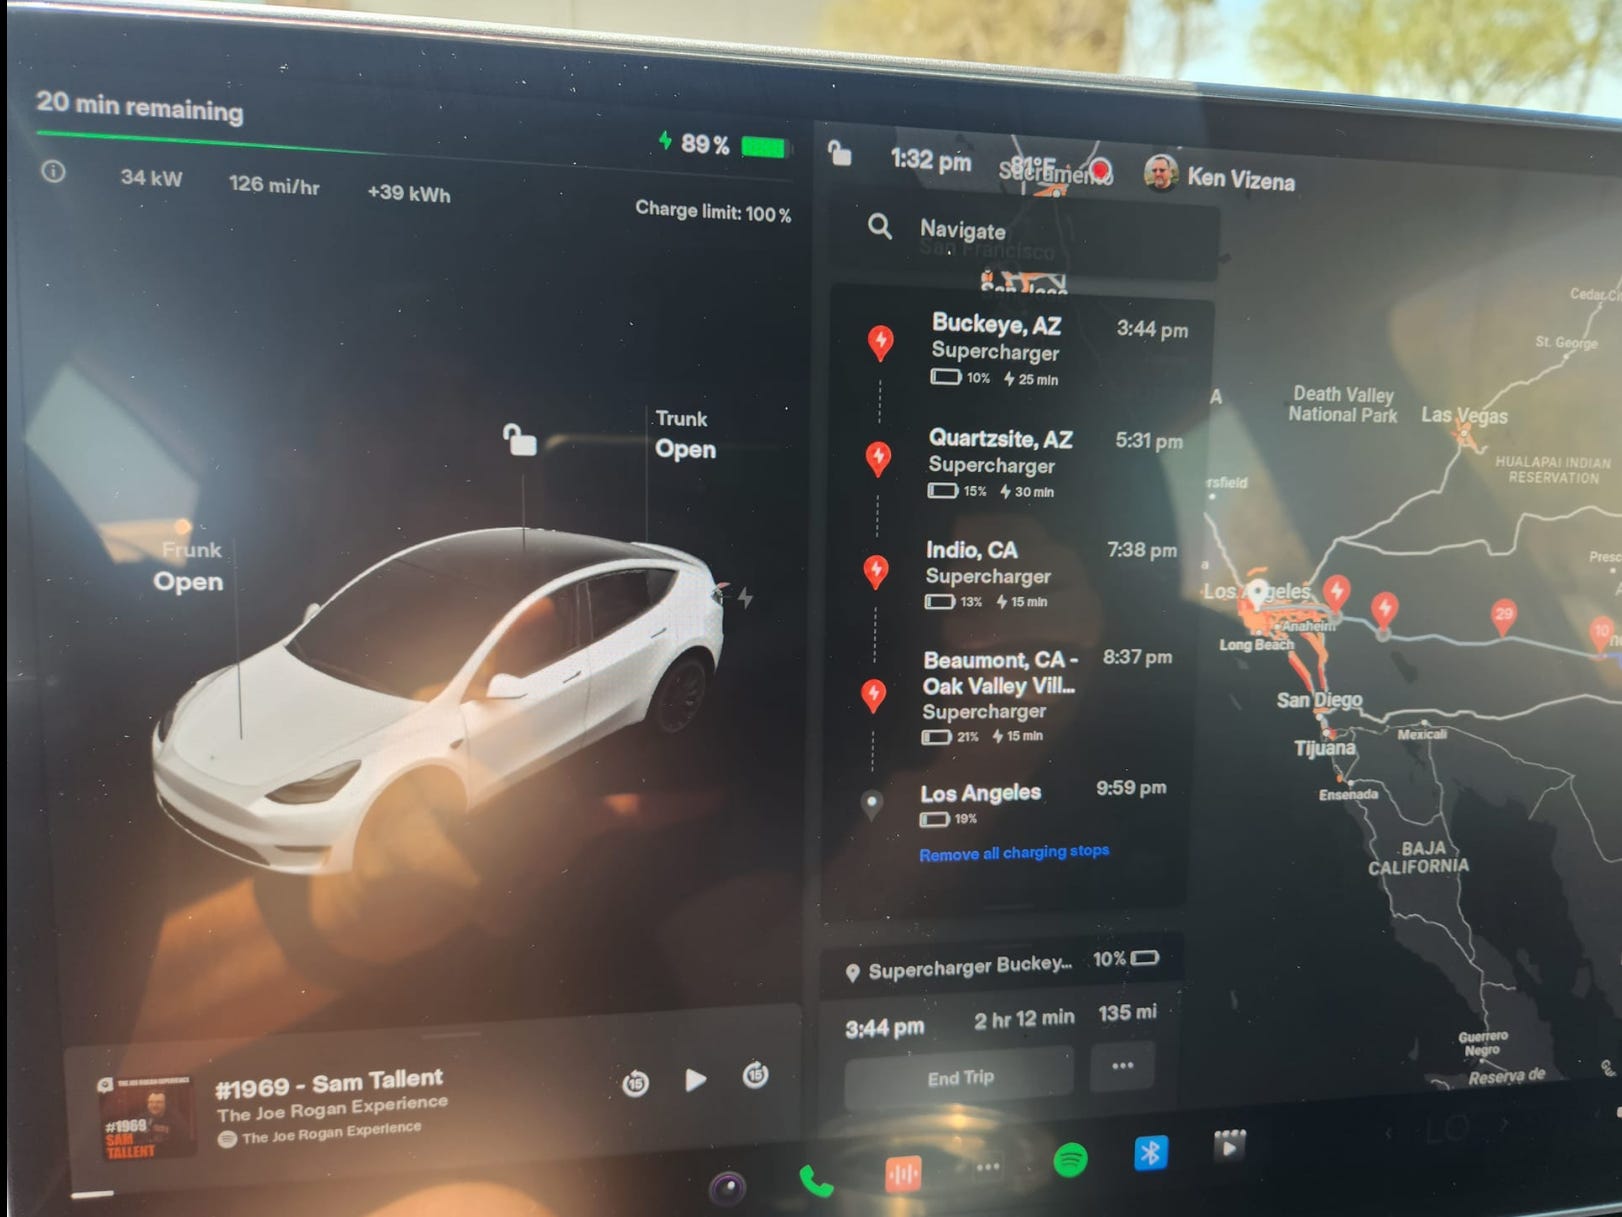 <p>Brian Loughman, a Model 3 owner, said he typically relies solely on the internal navigation system, which incorporates charging sites into the journey and alerts drivers to which charging sites it predicts will be most efficient and which ones are busier. It's a <a href="https://www.businessinsider.com/tesla-owners-share-perks-best-features-electric-car-ev-2023-7#and-applauded-the-navigation-system-that-guides-them-to-the-best-chargers-4">favorite feature among Tesla owners.</a></p><p>"Hop in the car while connected to your home charger and program the full route into the car," Loughman told Insider over email. "It will tell you where to stop, how low your battery will be when you get there, and how many minutes you'll need to charge before continuing on your route."</p>